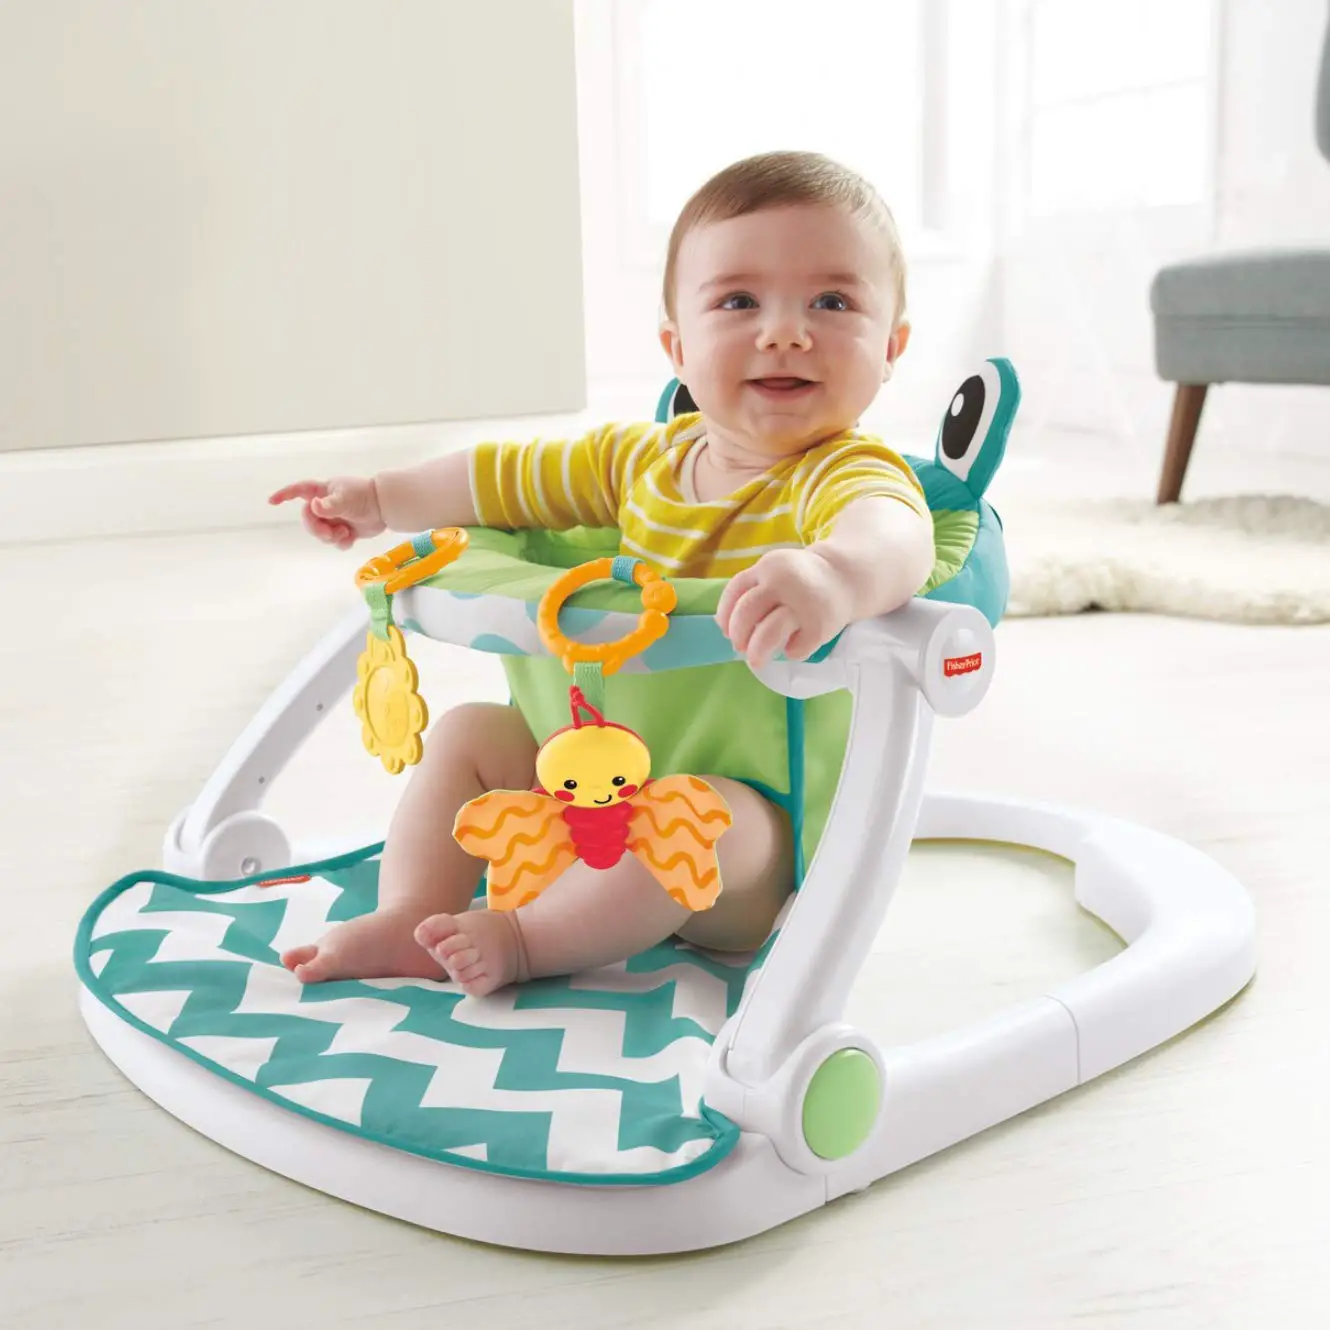 can a 4 month old use a walker